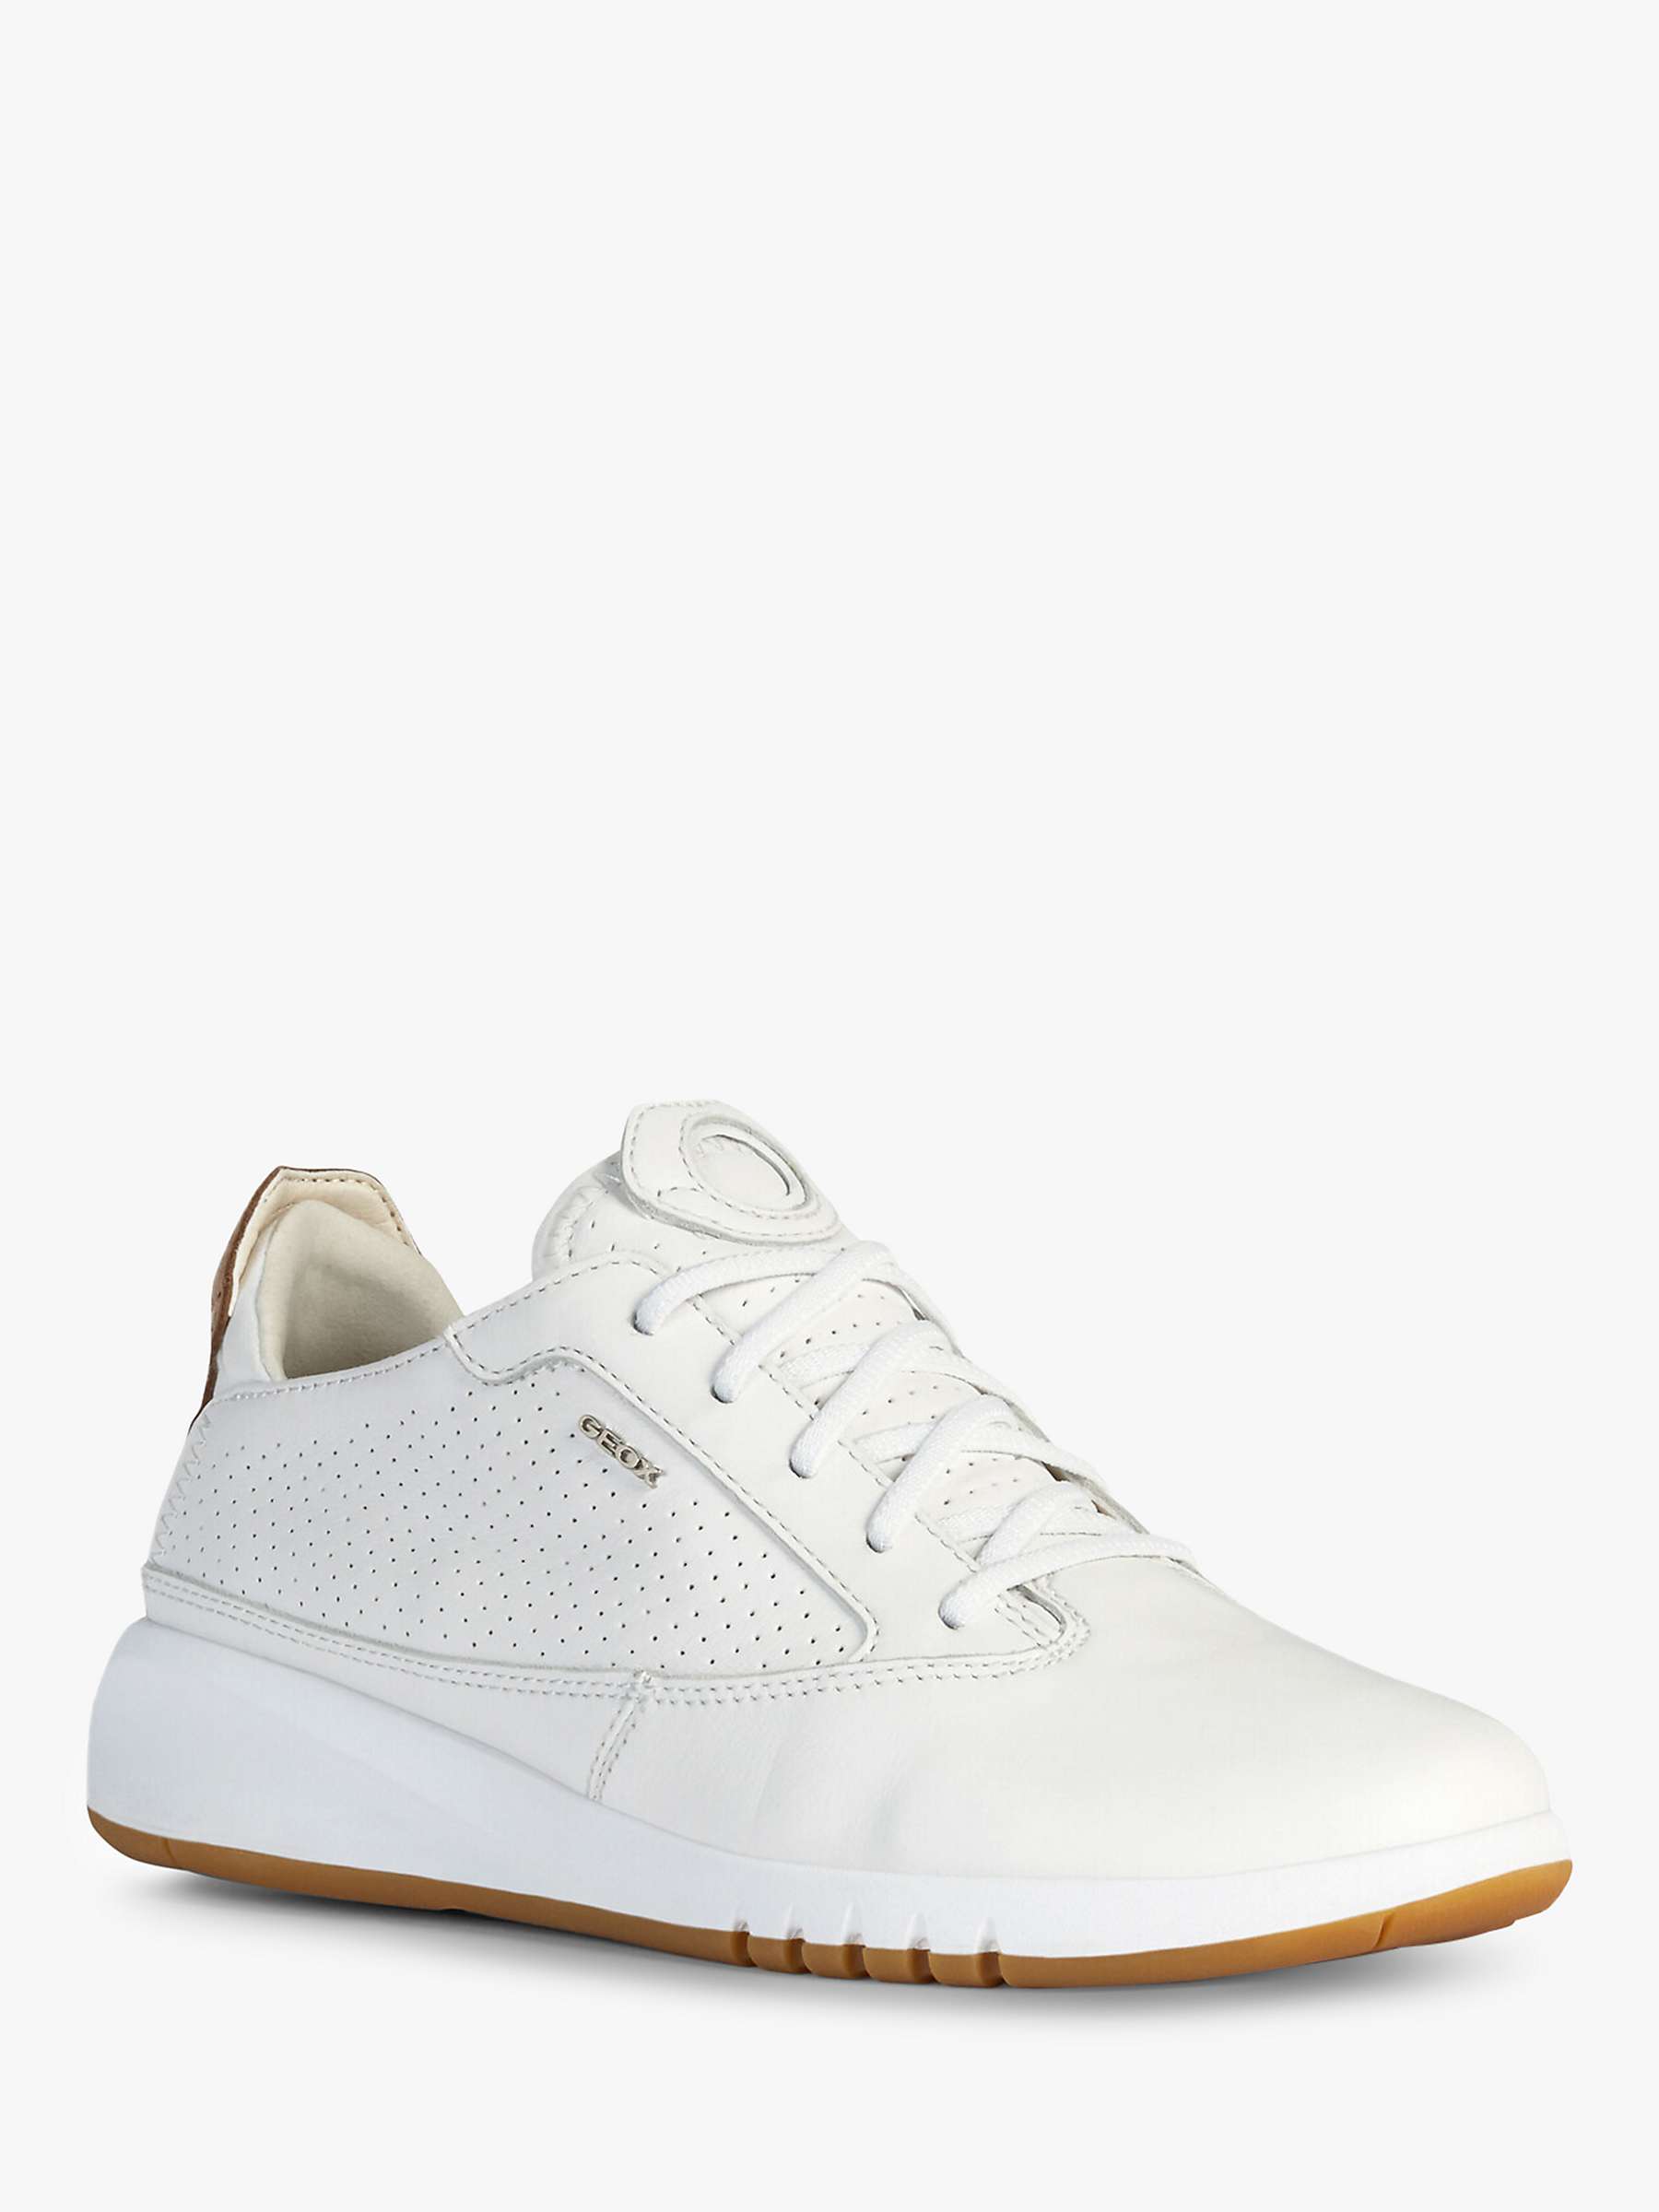 Buy Geox Aerantis Leather Trainers, White Online at johnlewis.com